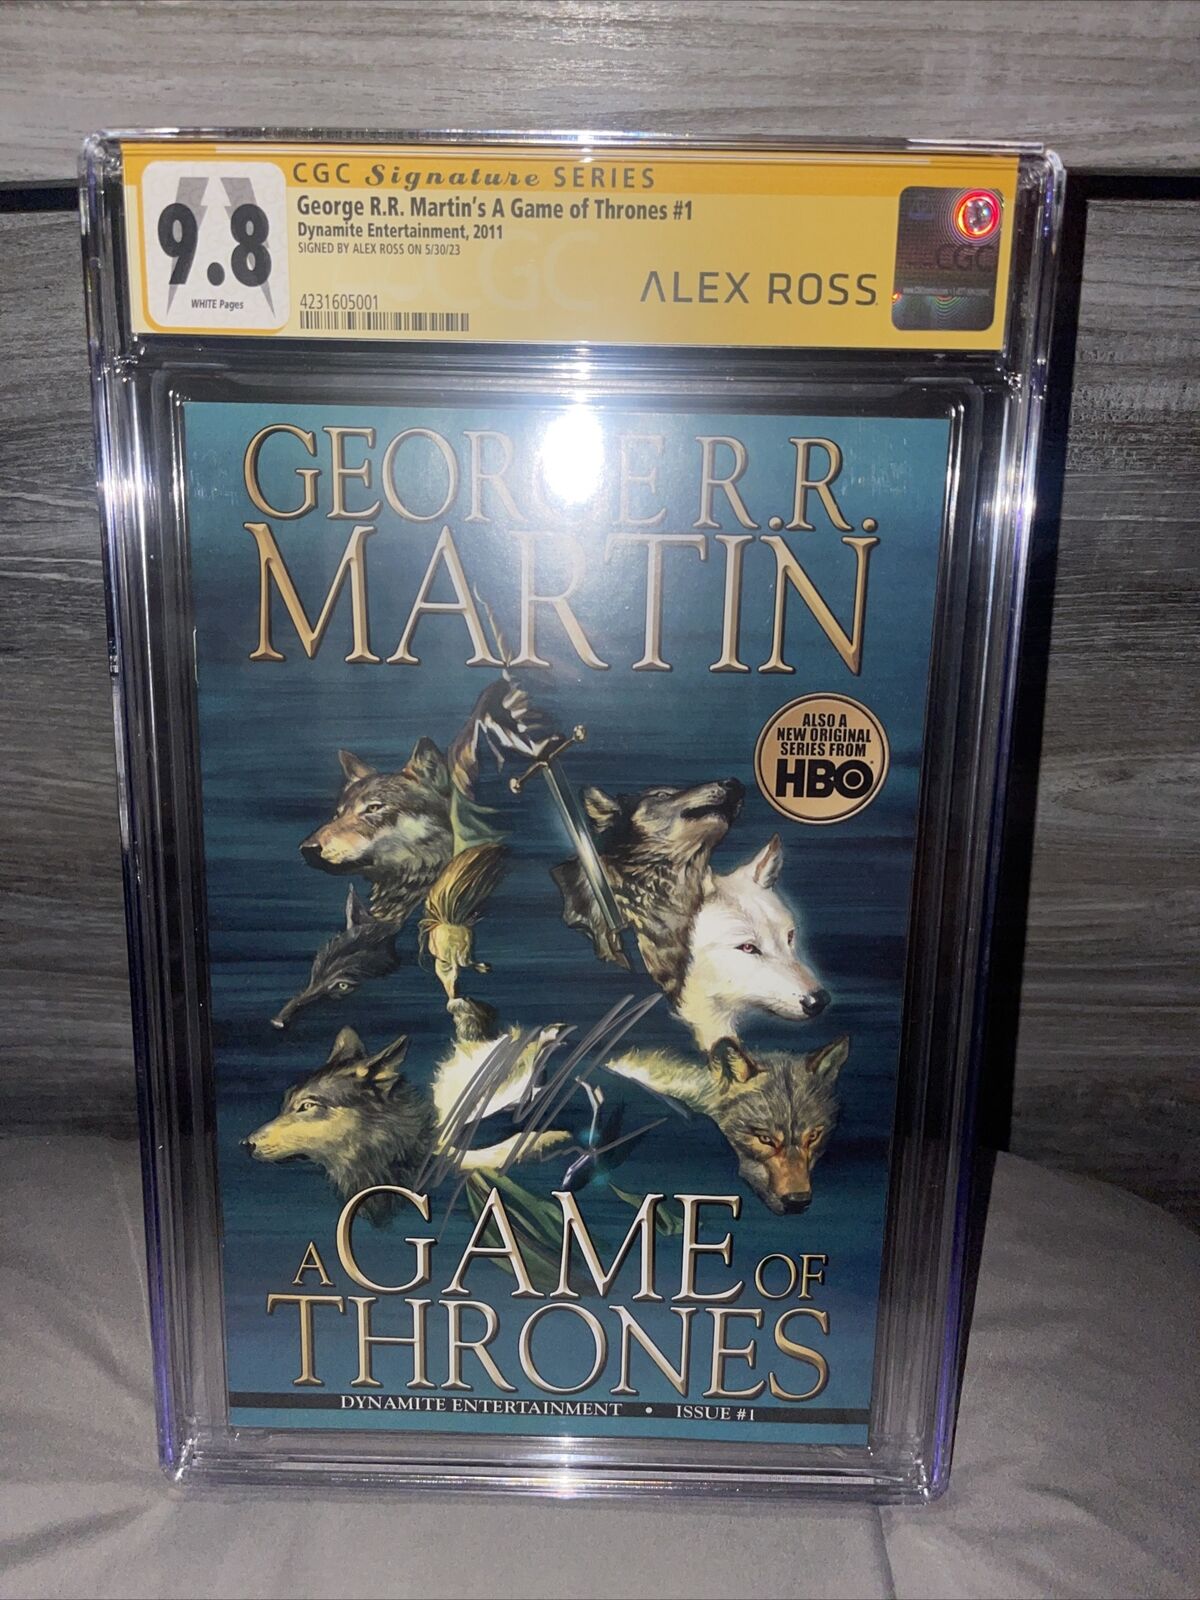 A GAME of THRONES #1 George R.R. Martin CGC SS 9.8 Alex Ross Signature